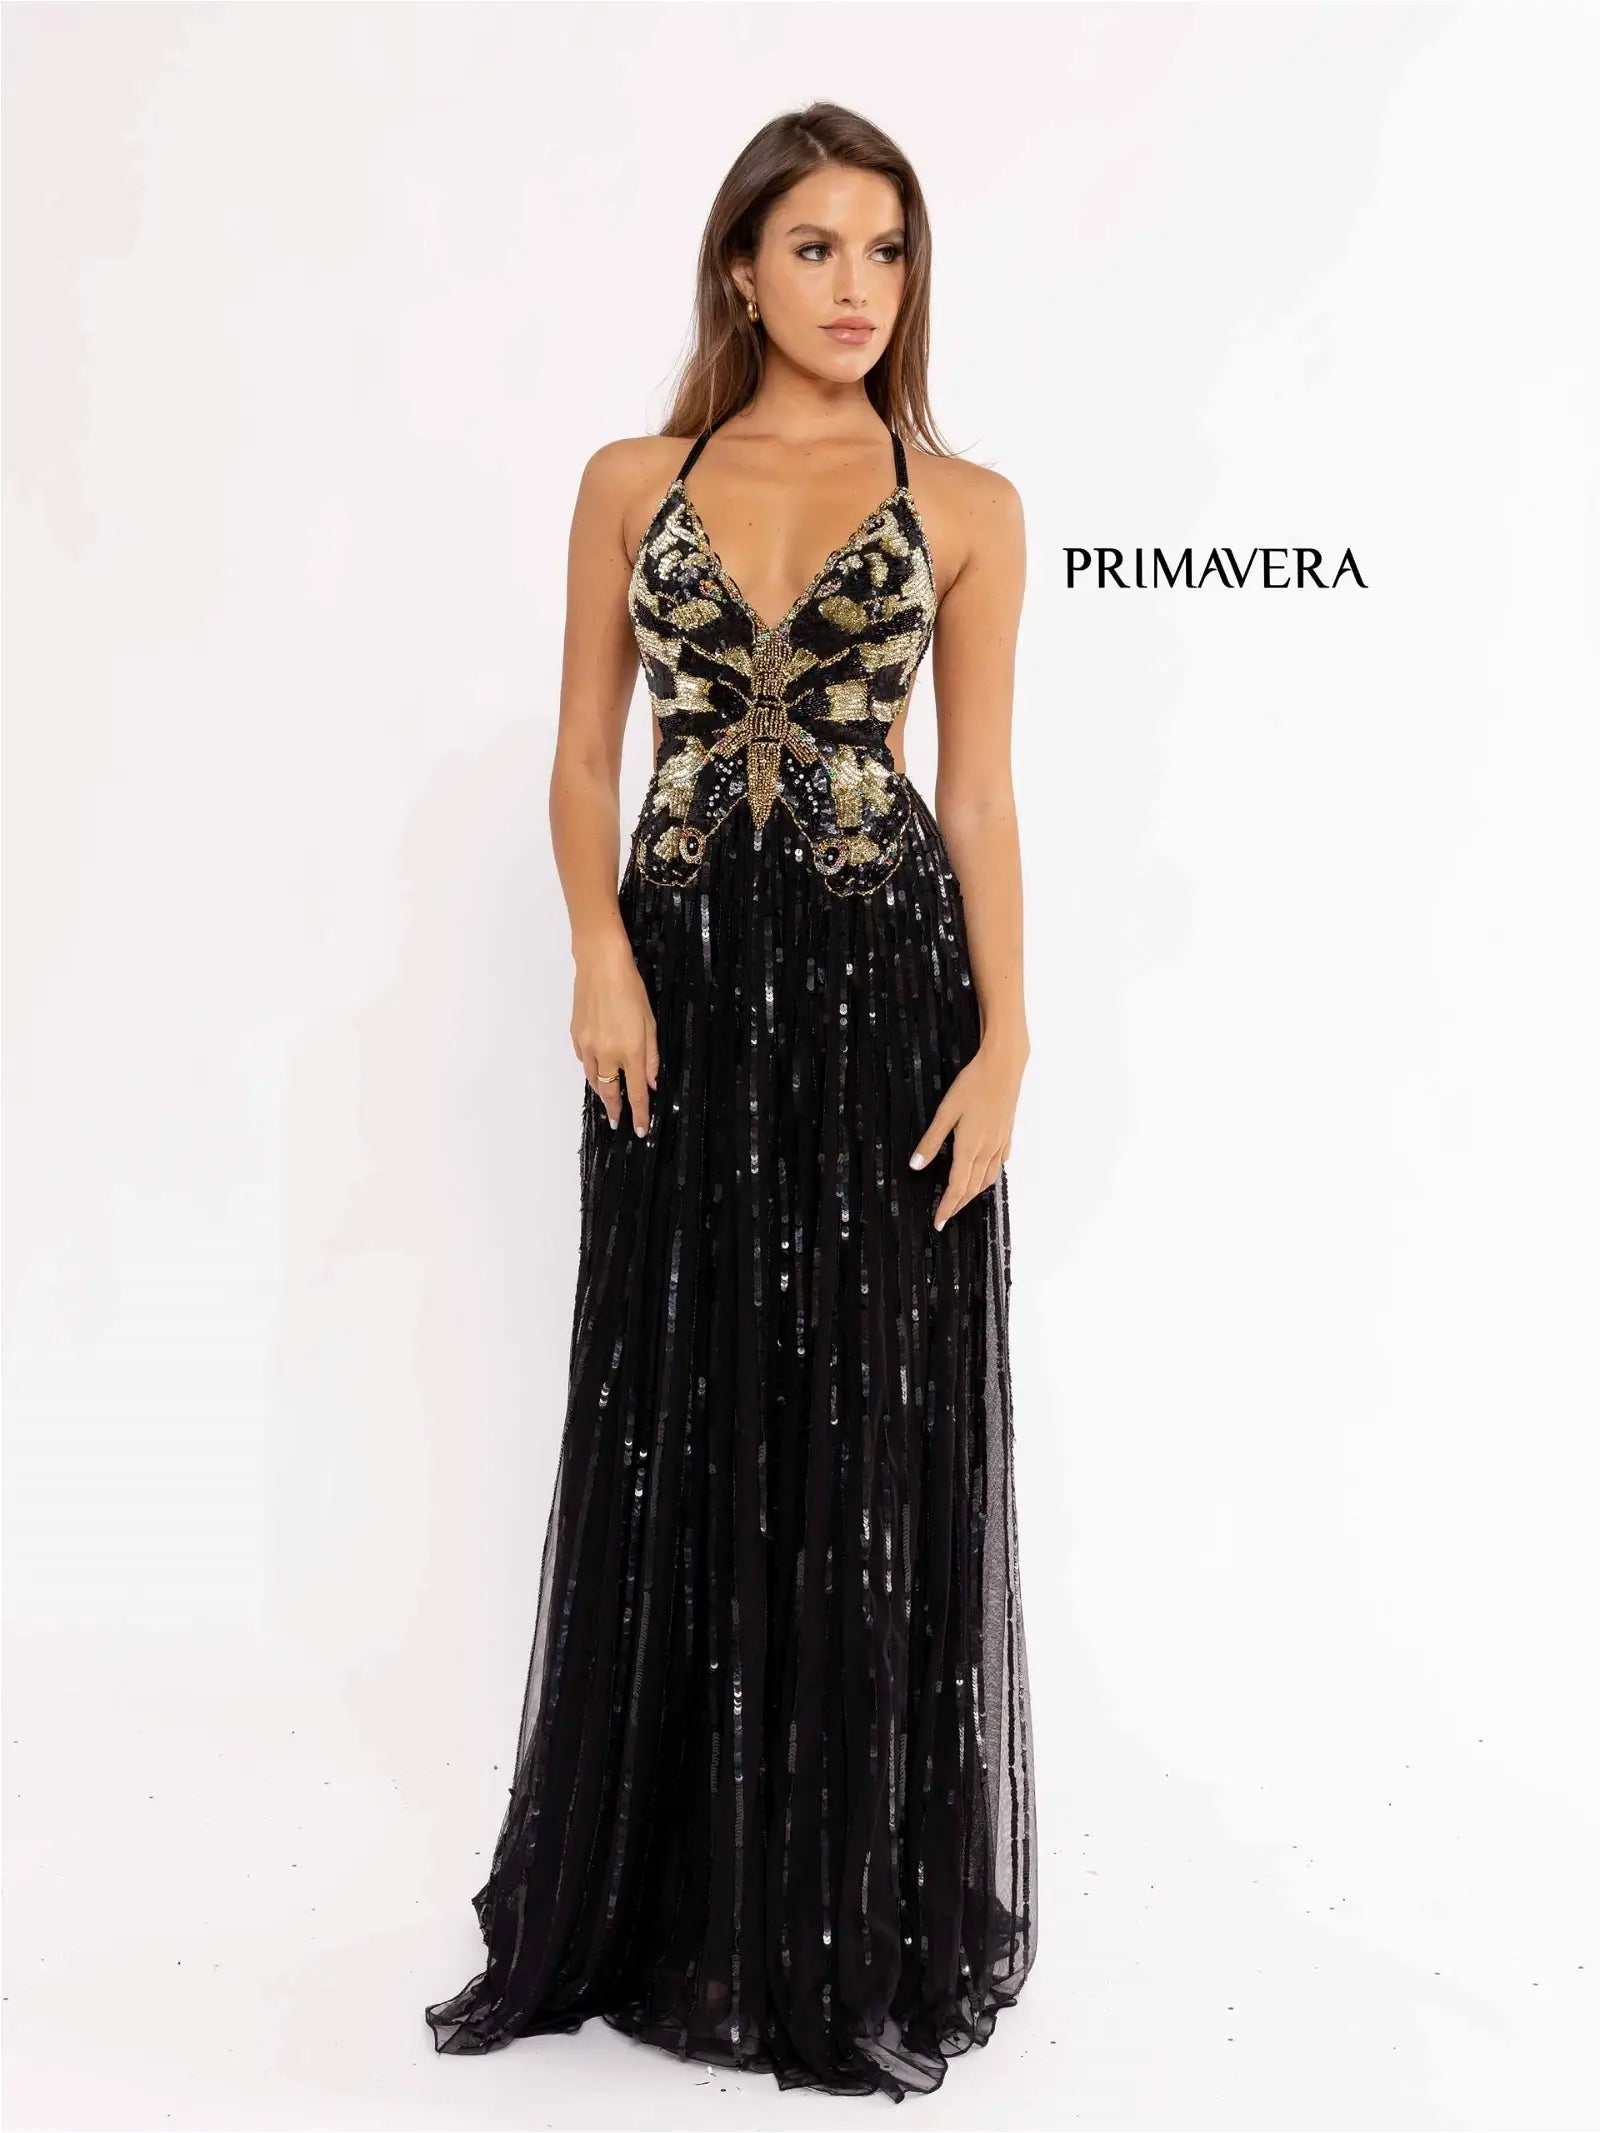 Primavera Couture 3957 Prom Dress Long Beaded Gown. This gown has a beautiful butterfly design on it. Such a beautiful hand beaded gown.